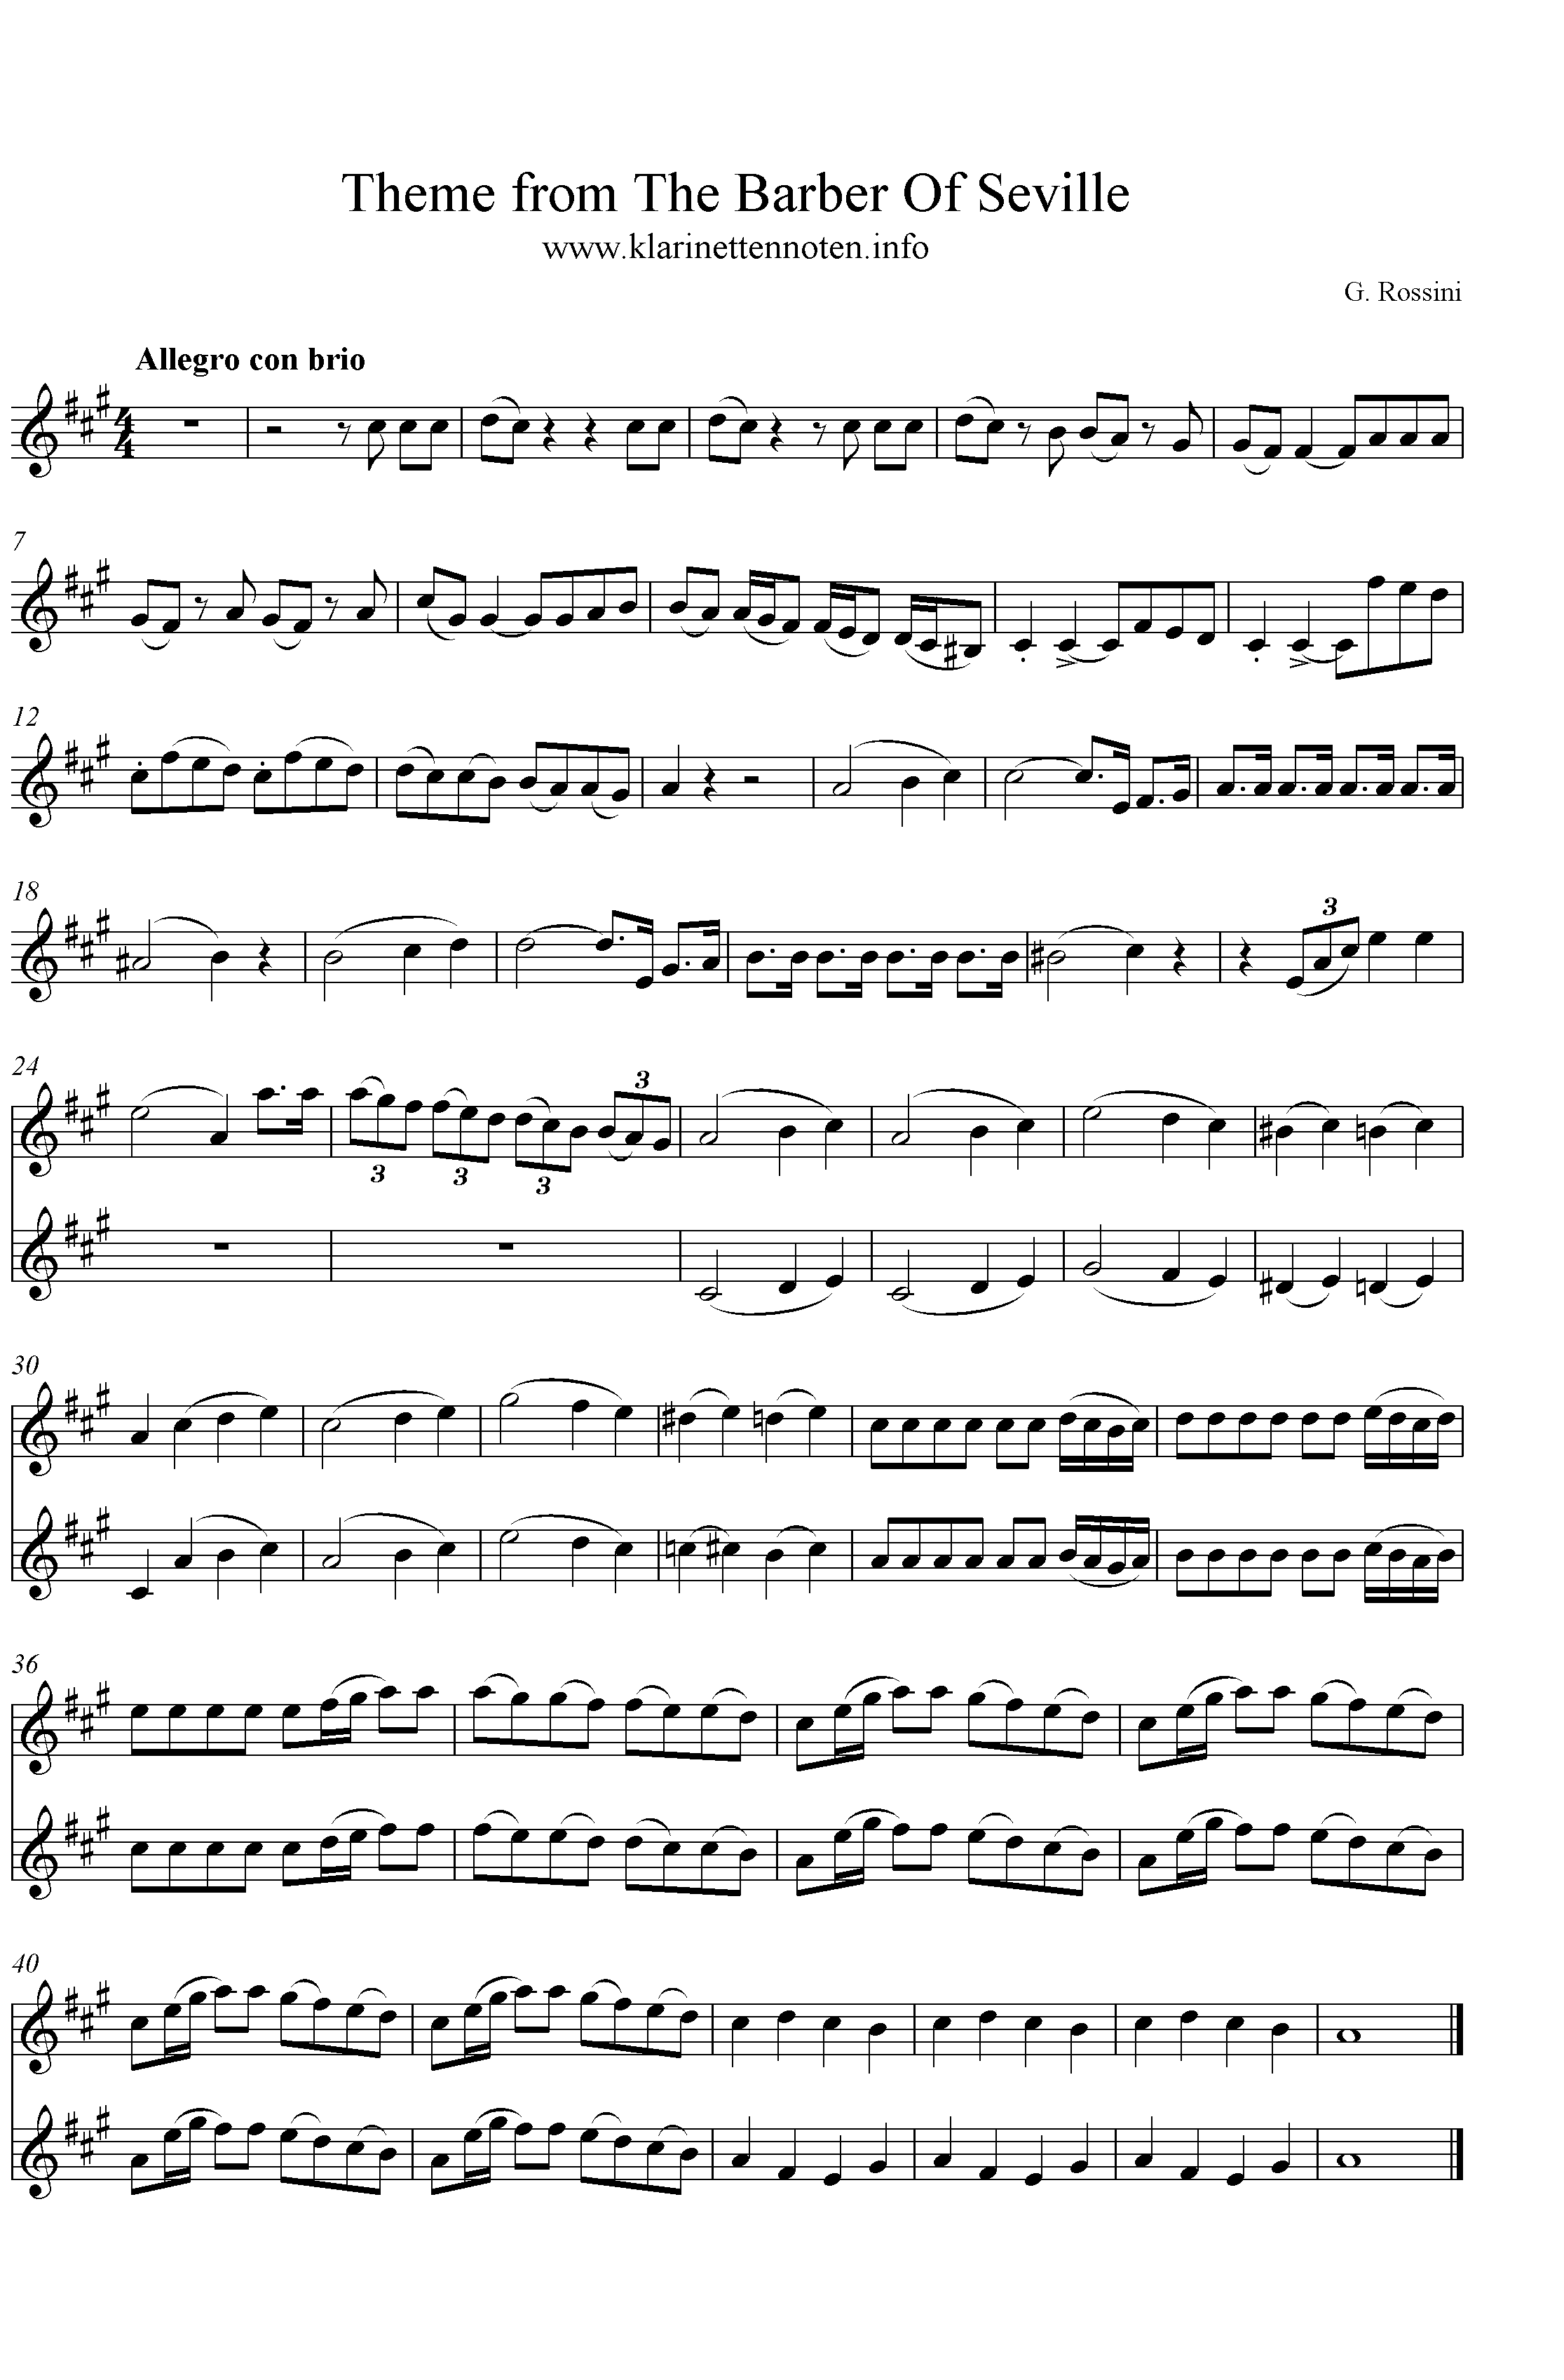 Theme from The Barber Of Sevilee, A-Major